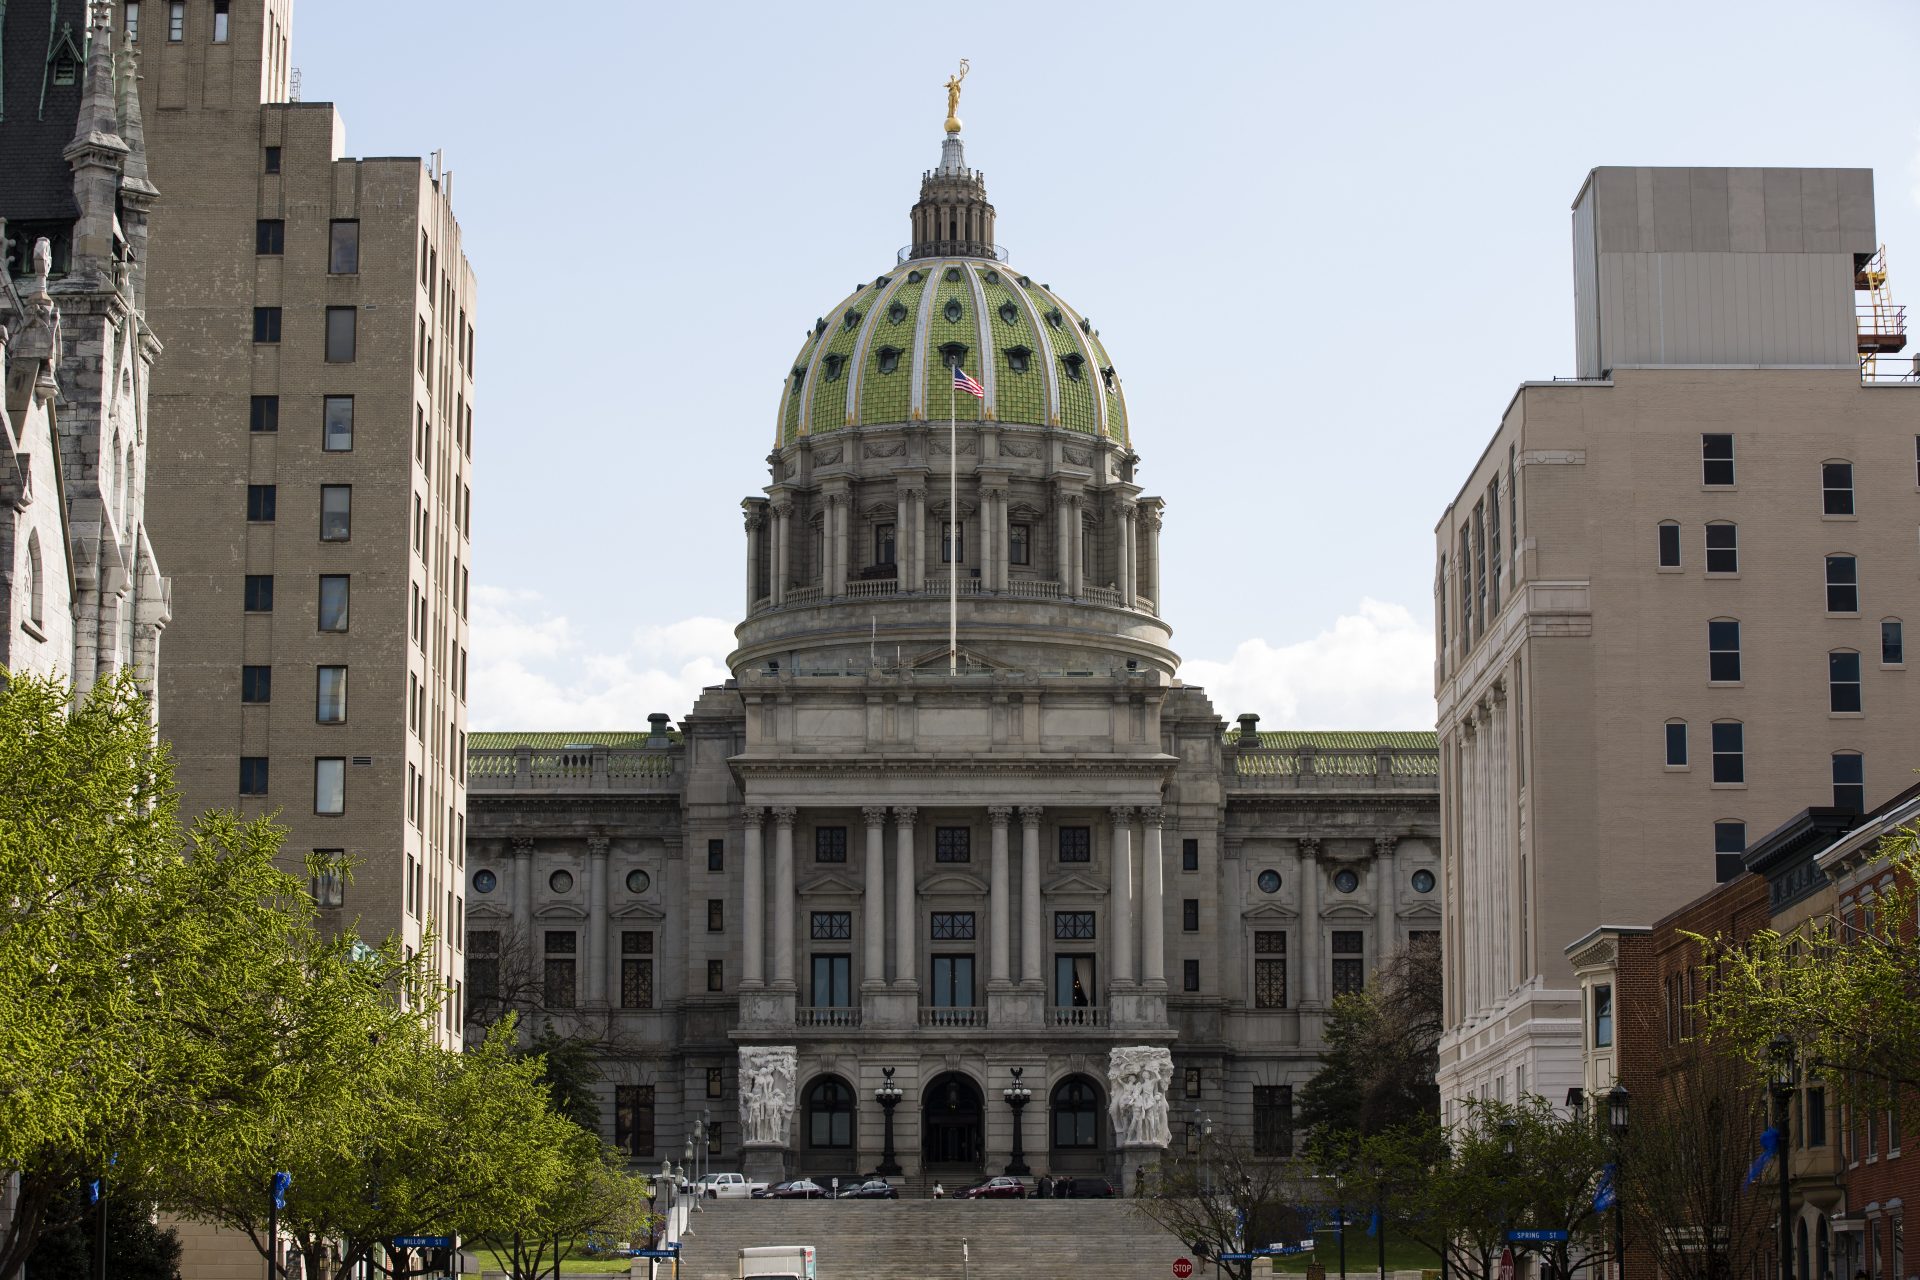 Shown is the Pennsylvania Capitol in Harrisburg, Pa. on the Wednesday, April 10, 2019.